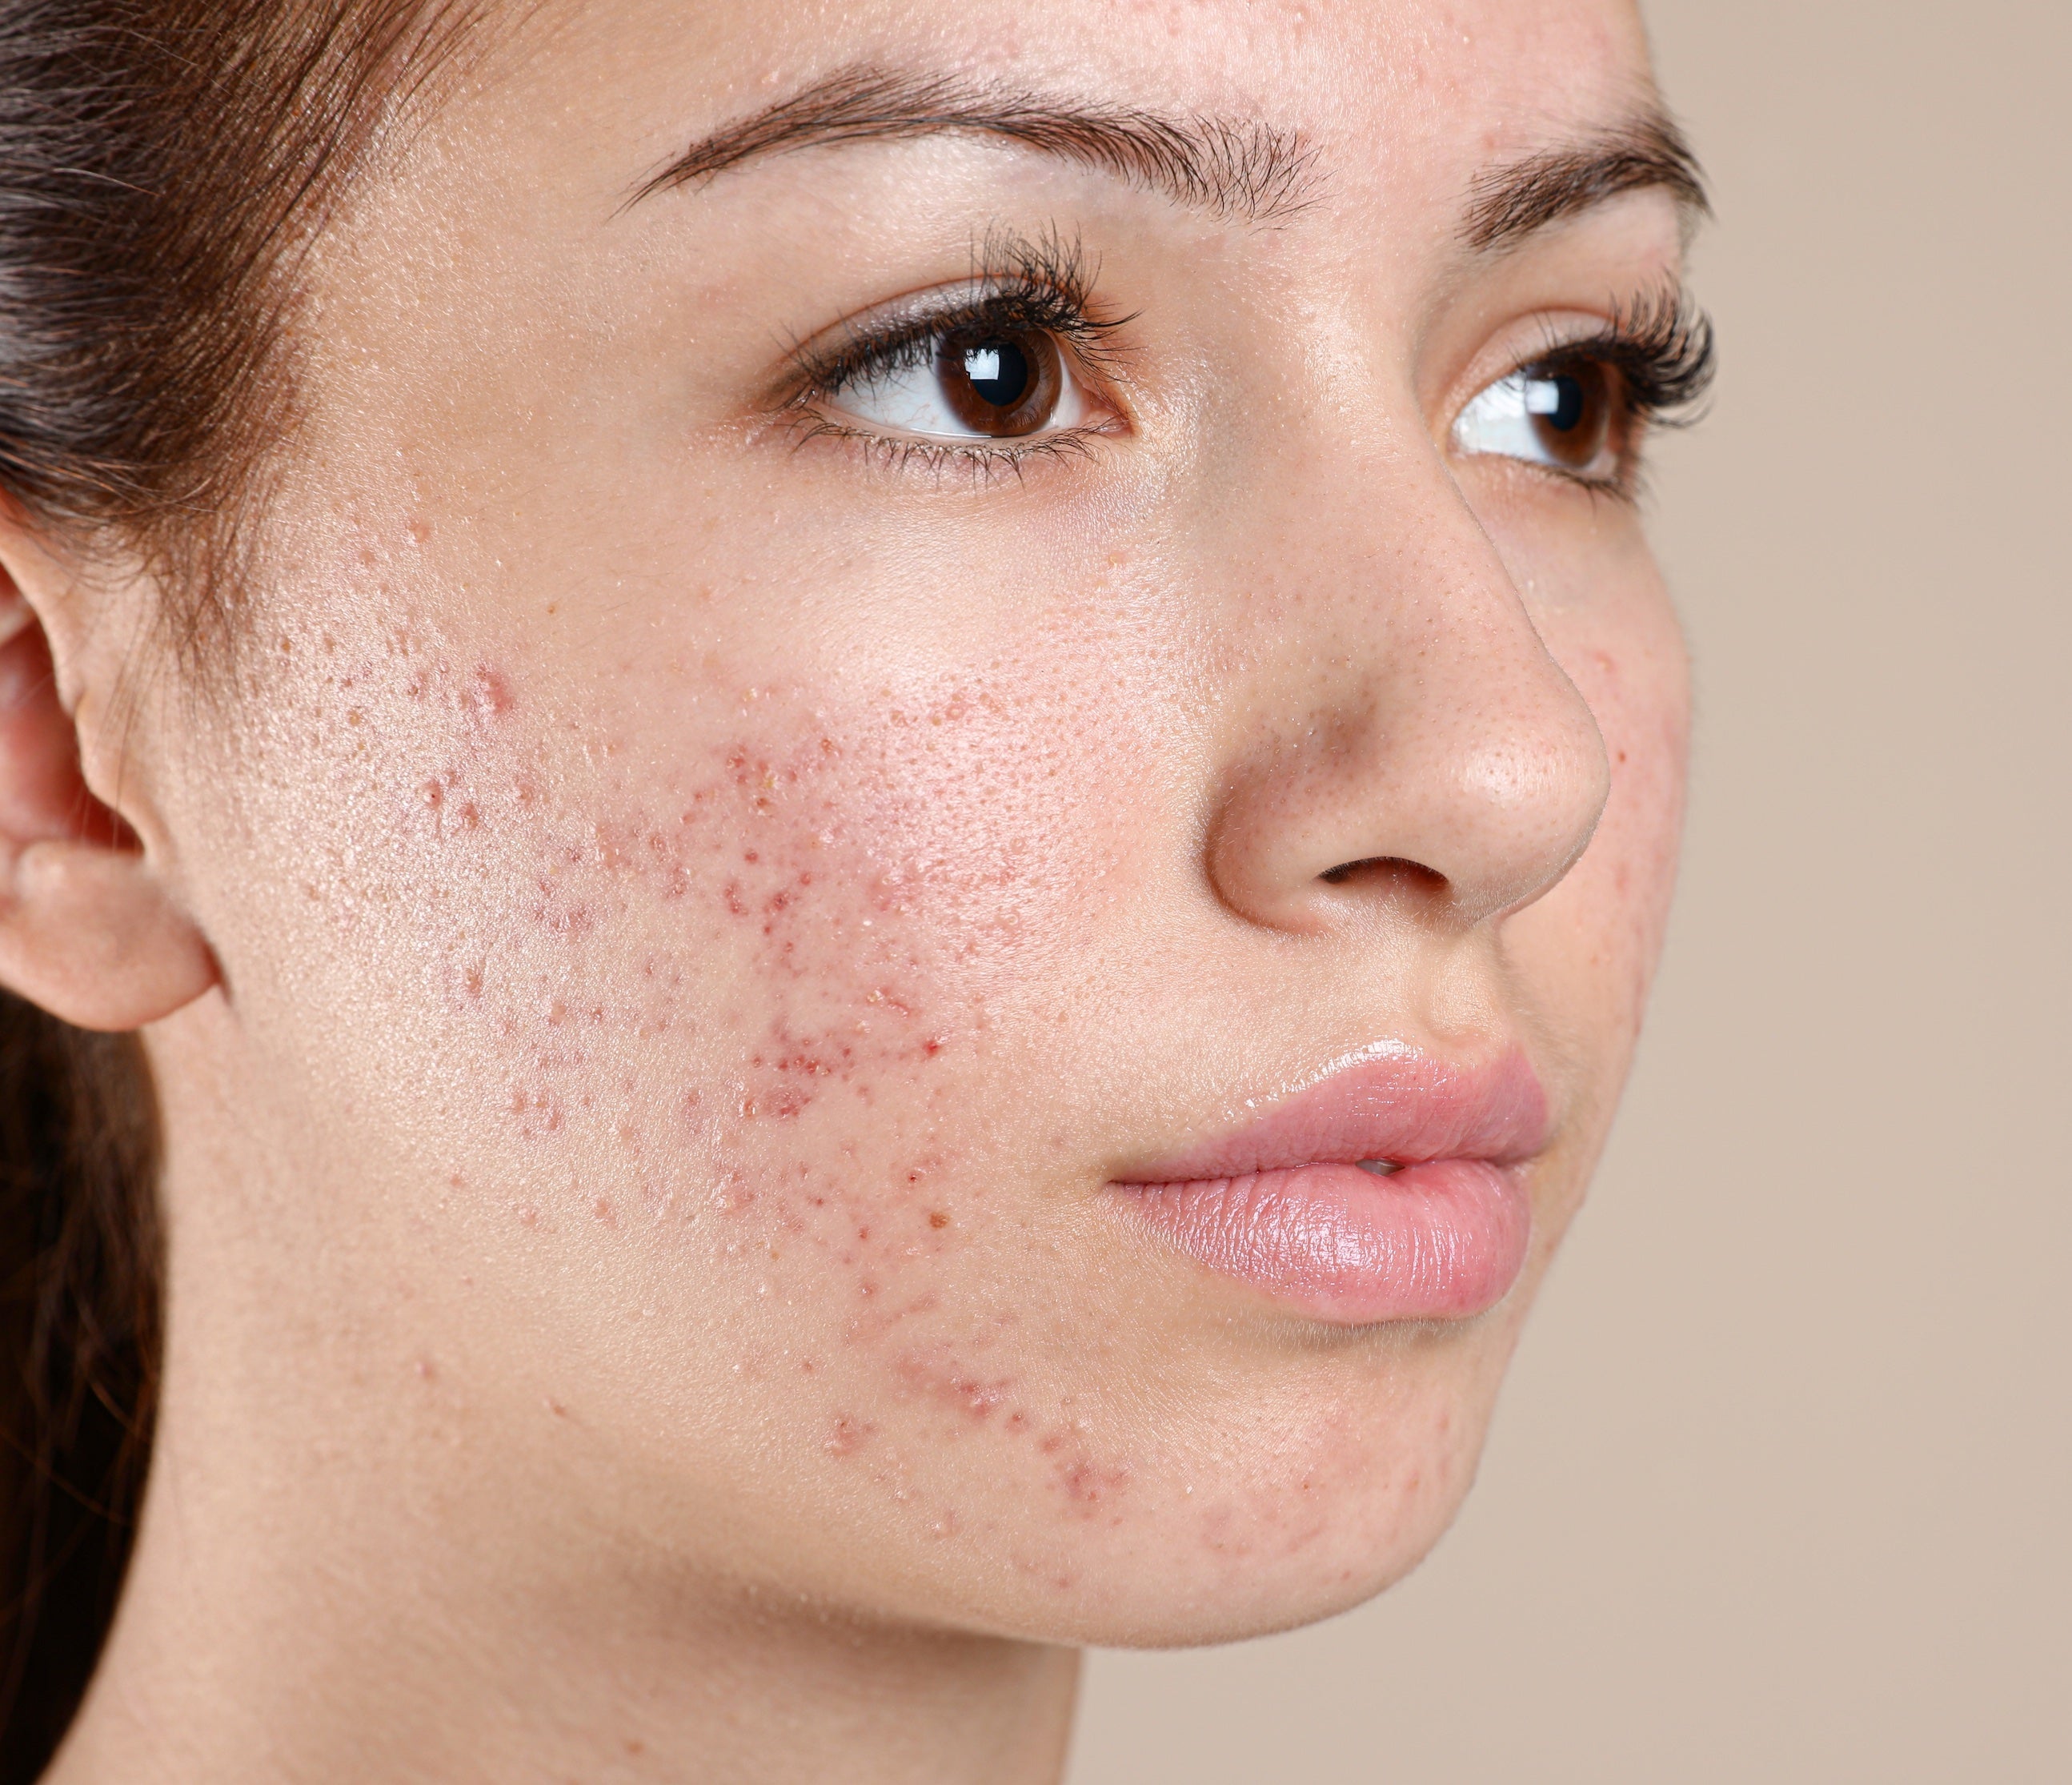 Decoding Acne: Identifying What Type and Rescue Tactics